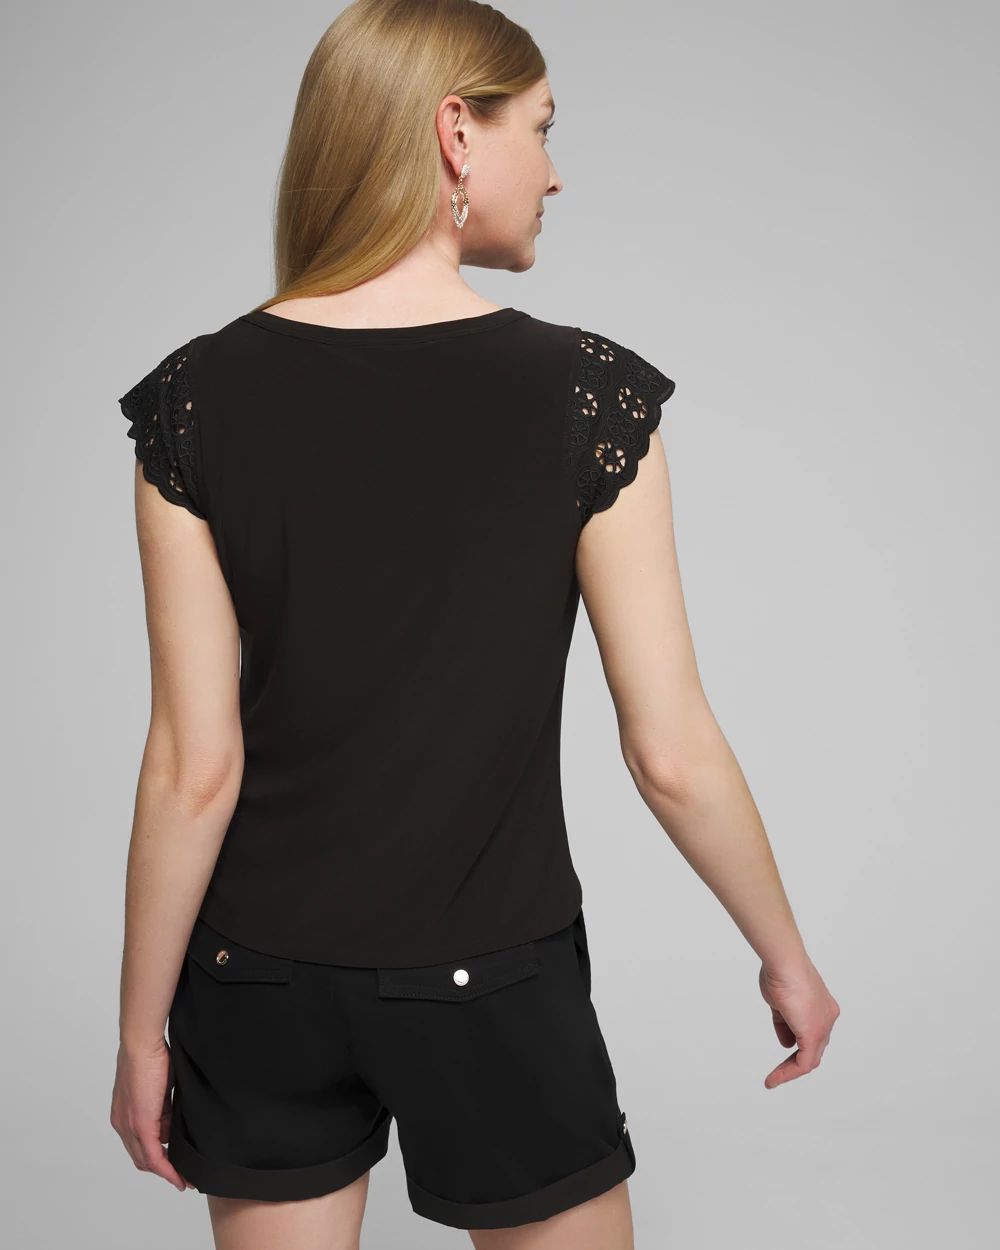 Outlet WHBM Eyelet Sleeve Tee click to view larger image.